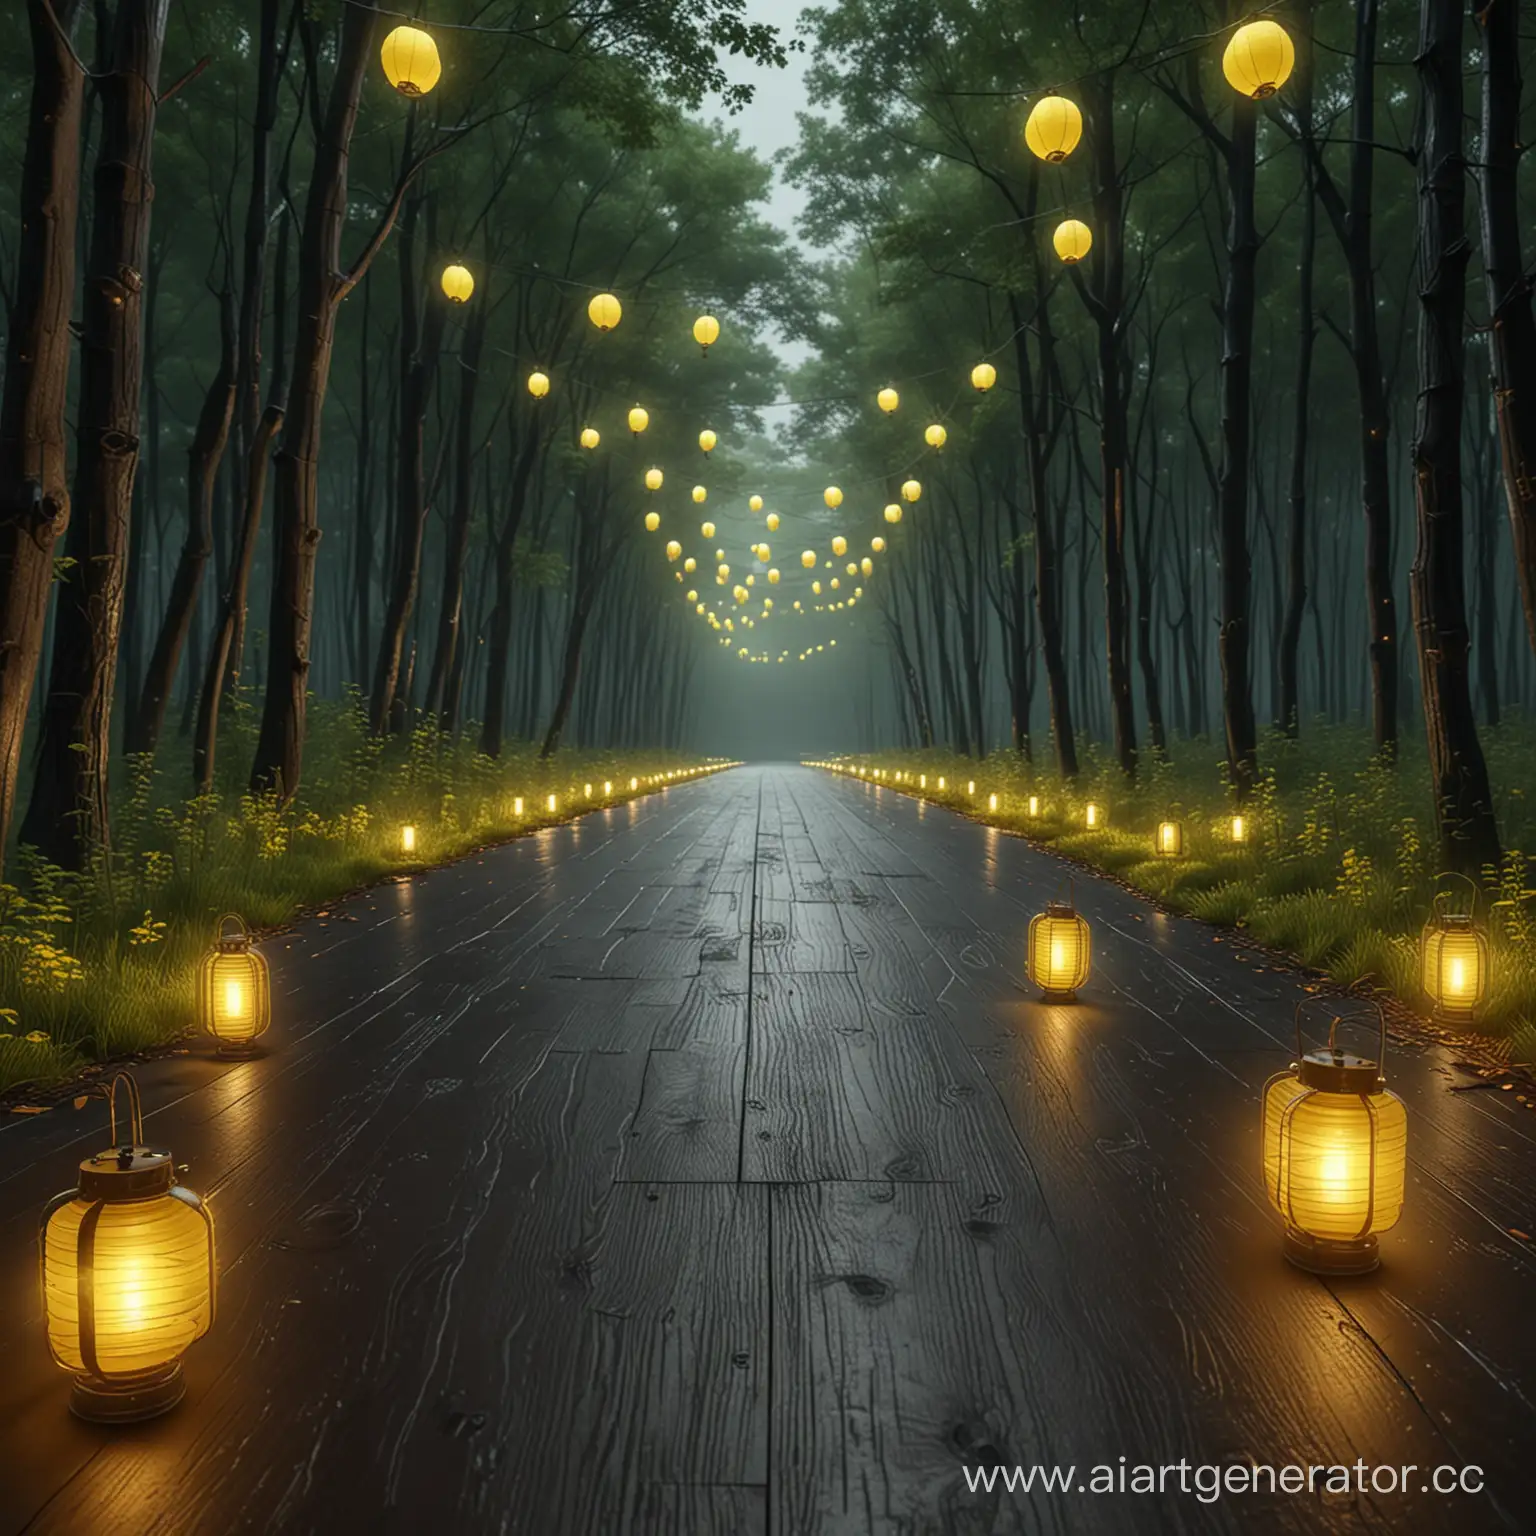 draw laminated plywood, the color of the plywood is green. The background is a dark forest, the road is illuminated with yellow lanterns.The picture quality is 8K,photorealistic
